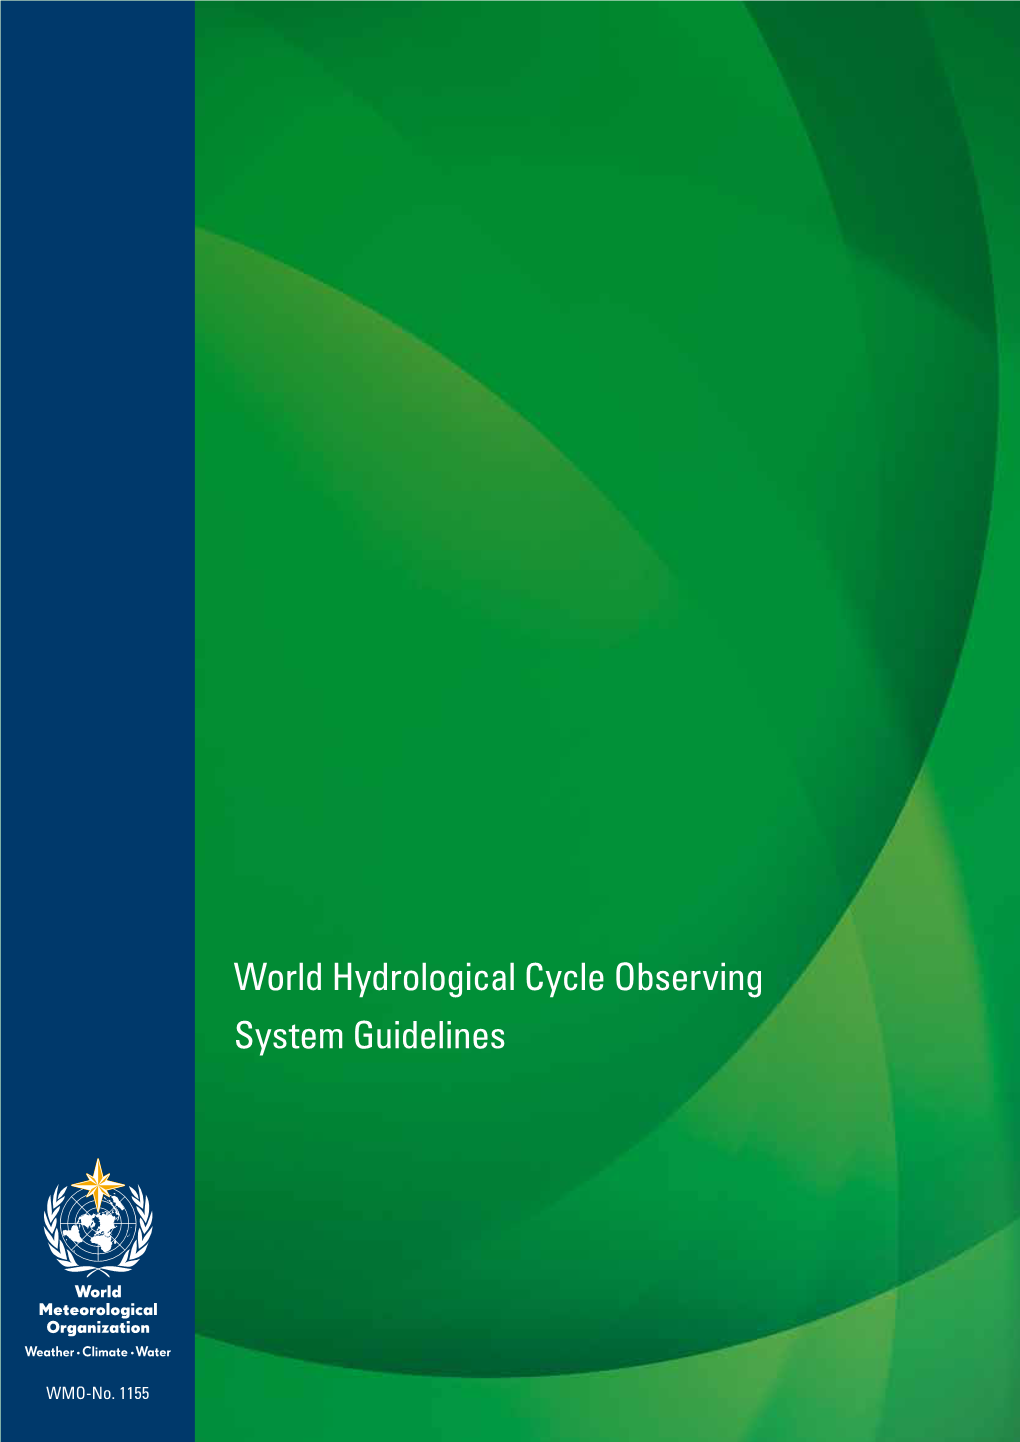 World Hydrological Cycle Observing System Guidelines